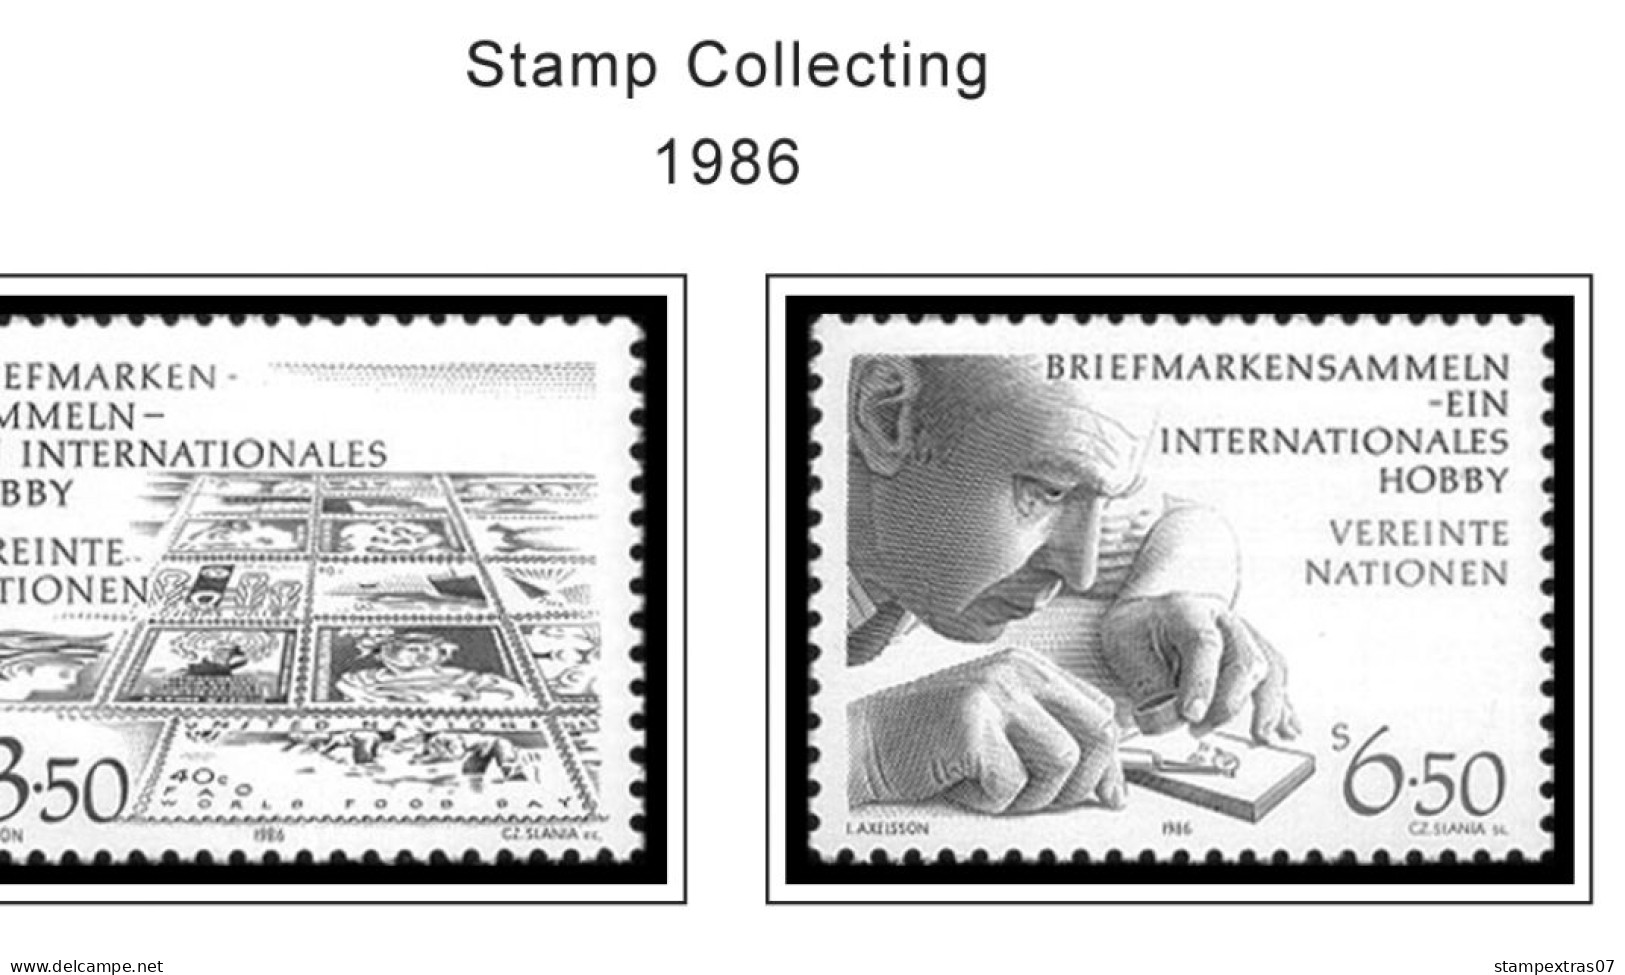 UNITED NATIONS - VIENNA 1979-2020 STAMP ALBUM PAGES (165 B&w Illustrated Pages) - Inglese